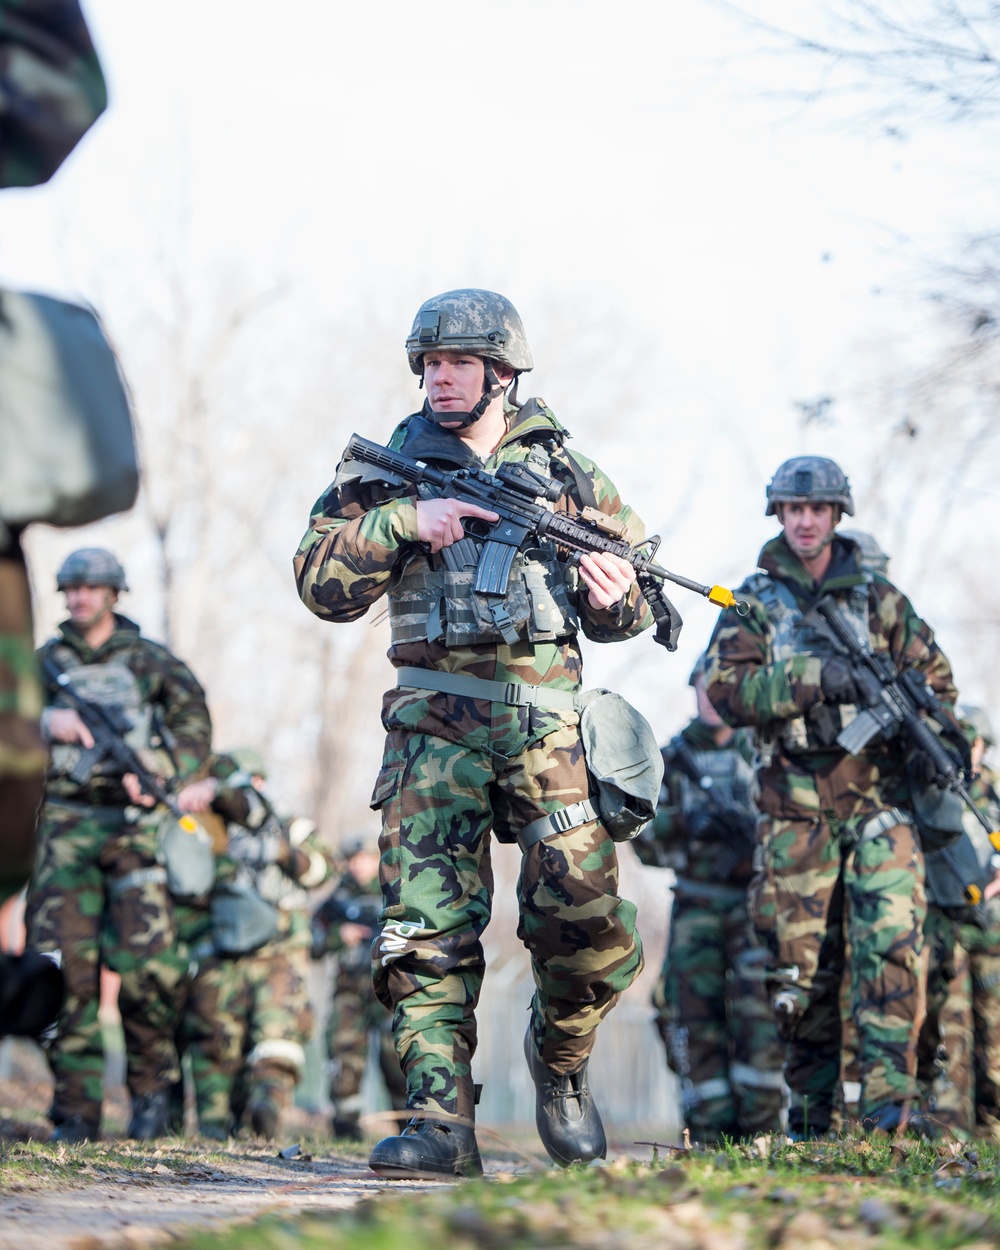 Defenders take part in readiness training